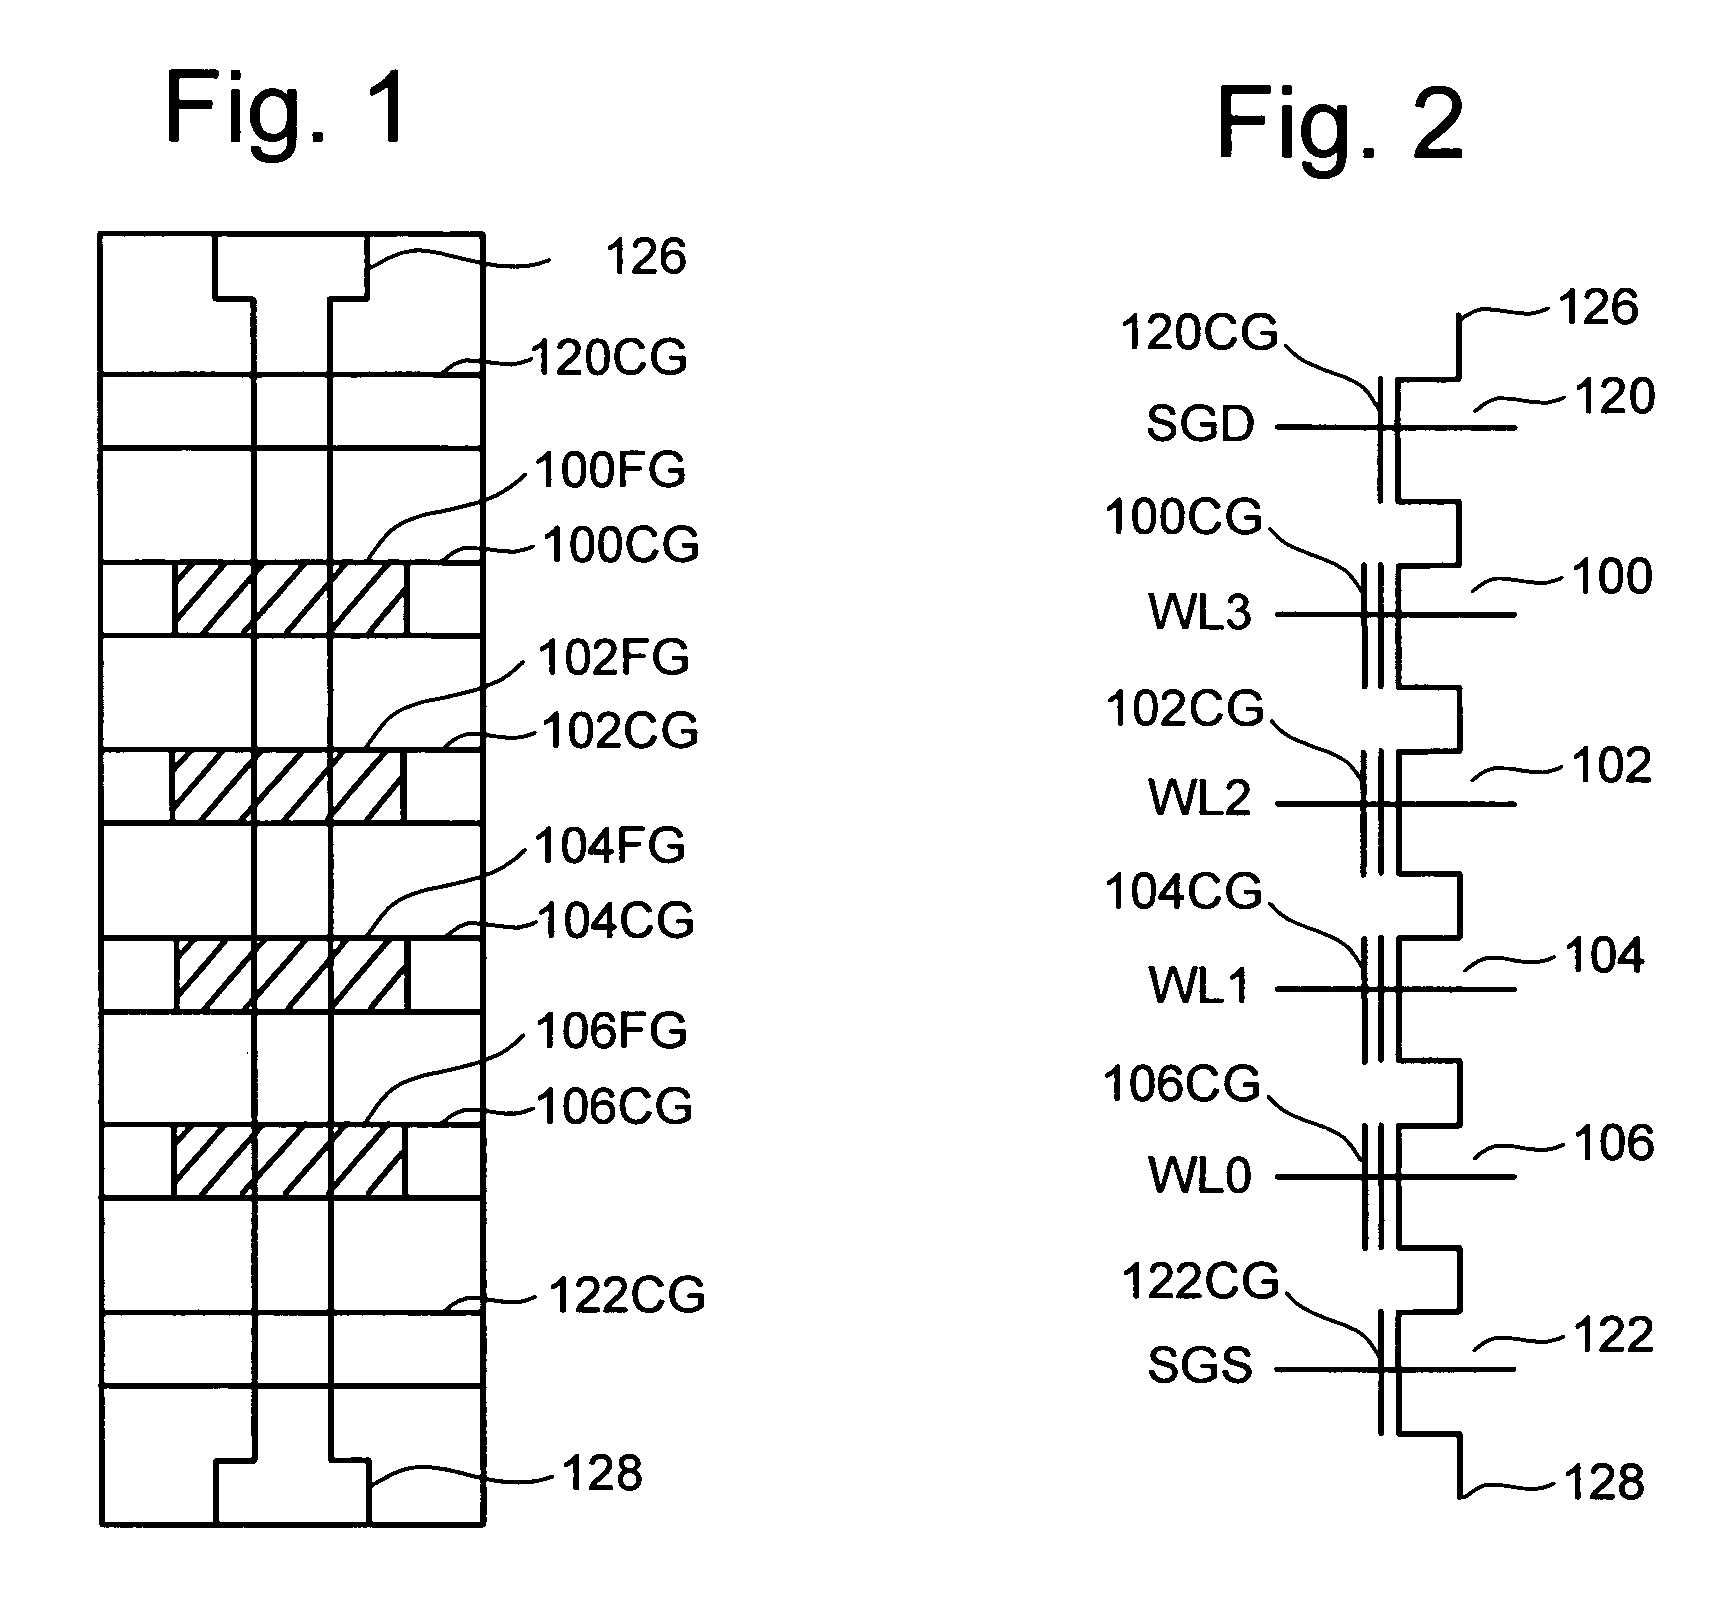 Systems for soft programming non-volatile memory utilizing individual verification and additional soft programming of subsets of memory cells